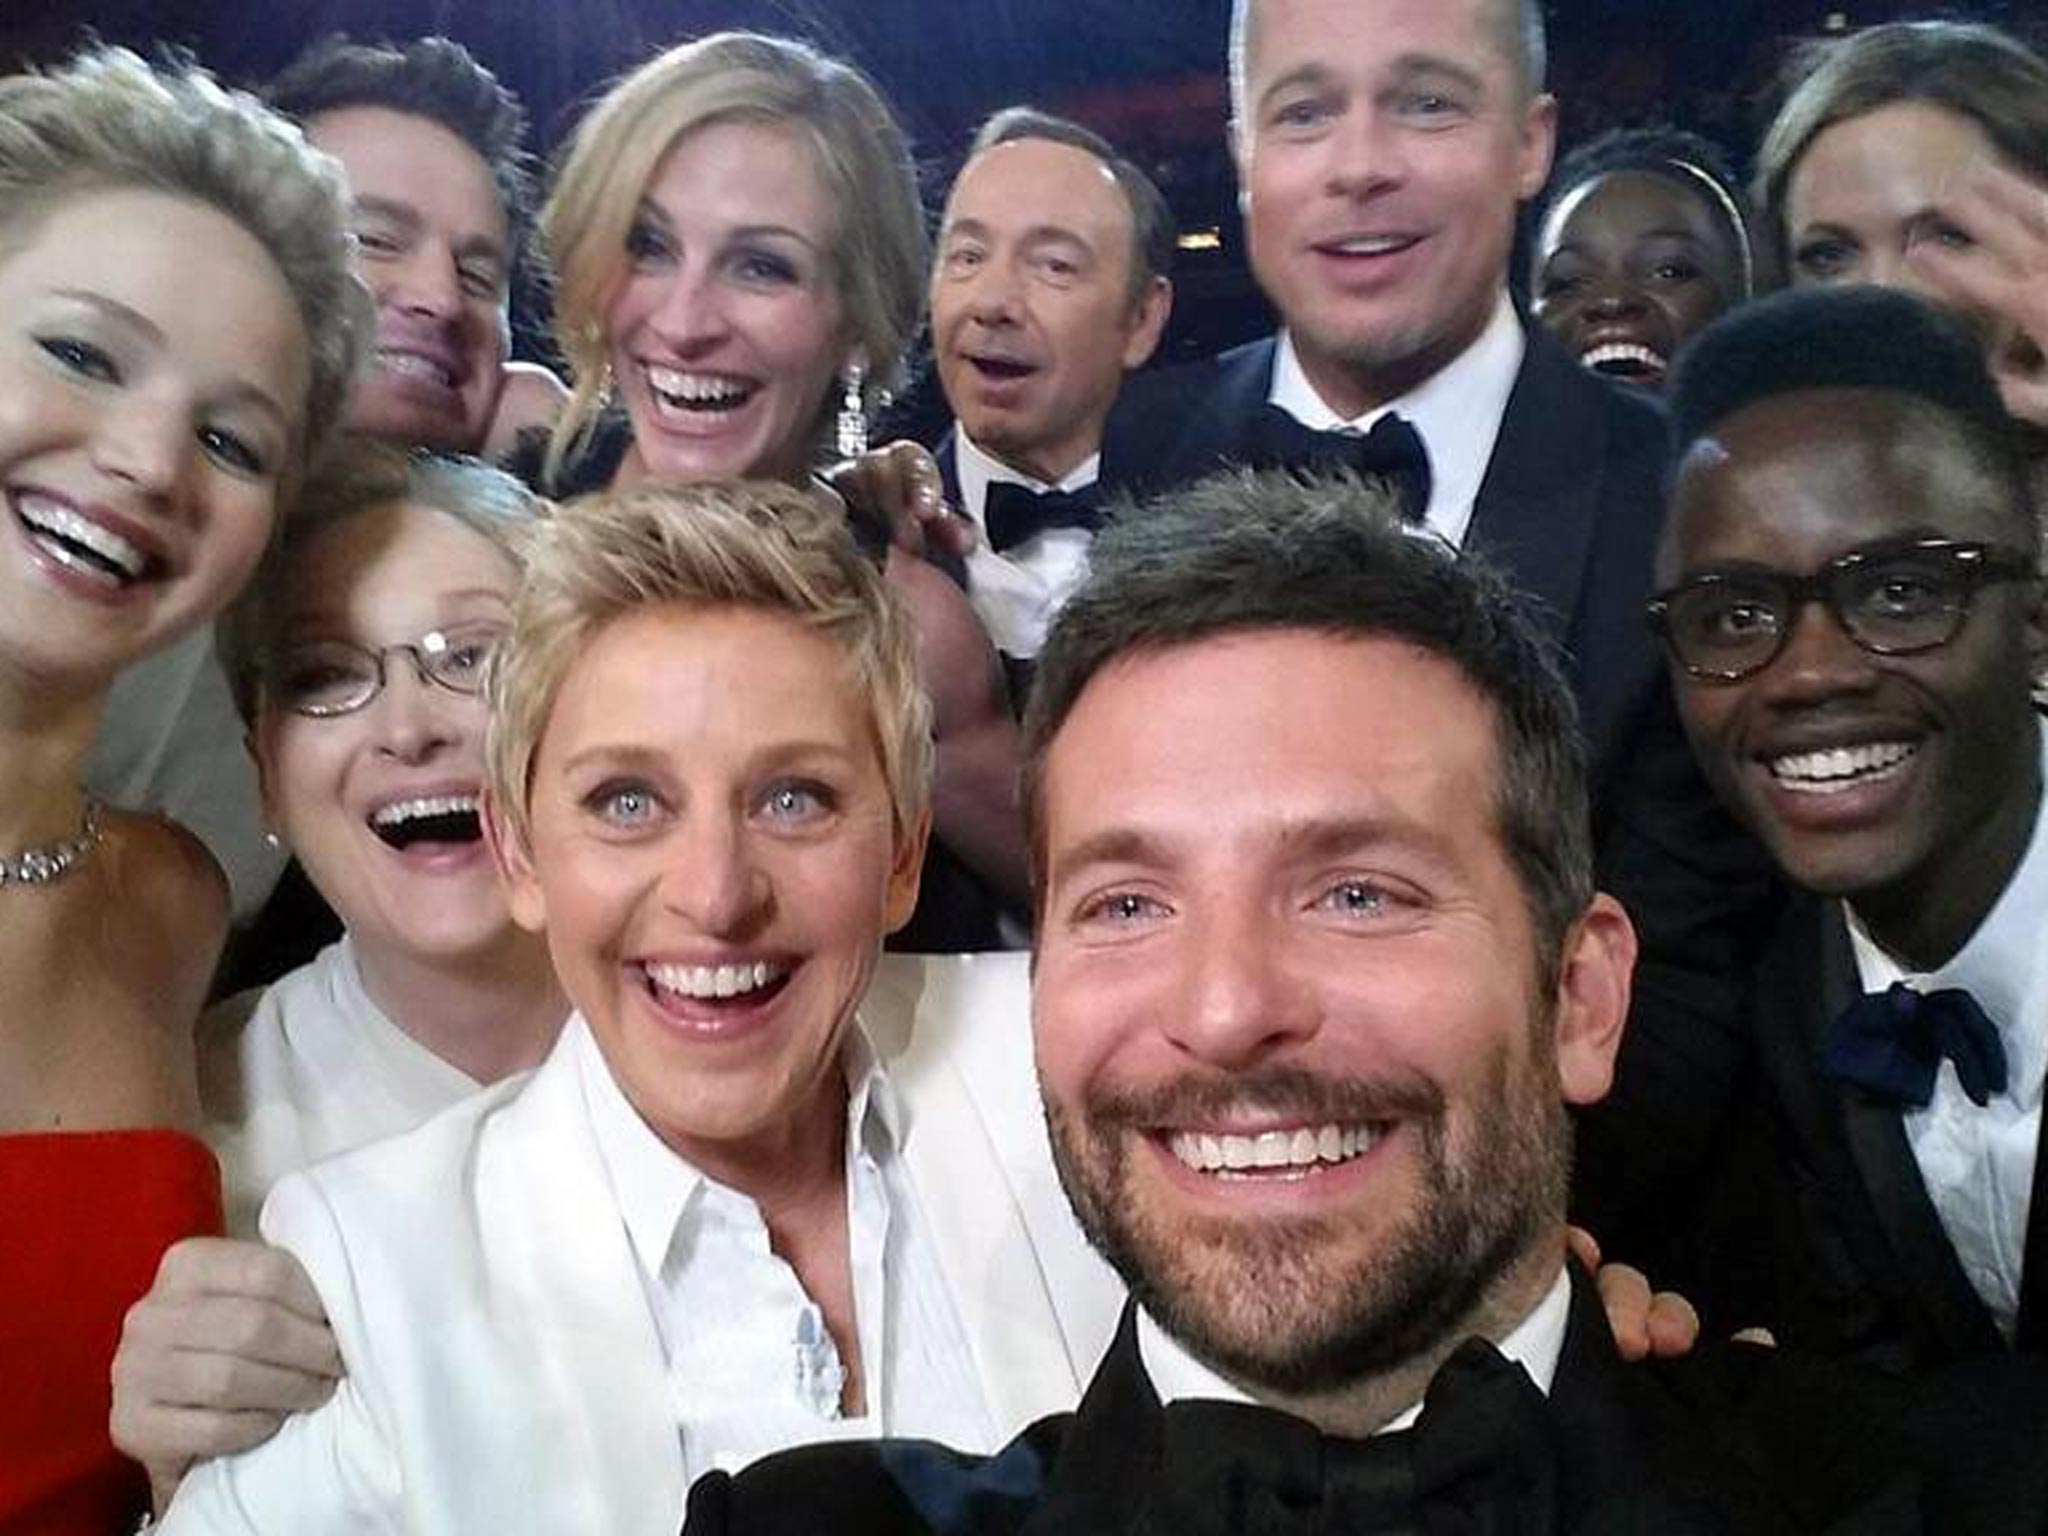 Actors front row from left, Jared Leto, Jennifer Lawrence, Meryl Streep, Ellen DeGeneres, Bradley Cooper, Peter Nyongío Jr., and, second row, from left, Channing Tatum, Julia Roberts, Kevin Spacey, Brad Pitt, Lupita Nyongío and Angelina Jolie as they pose